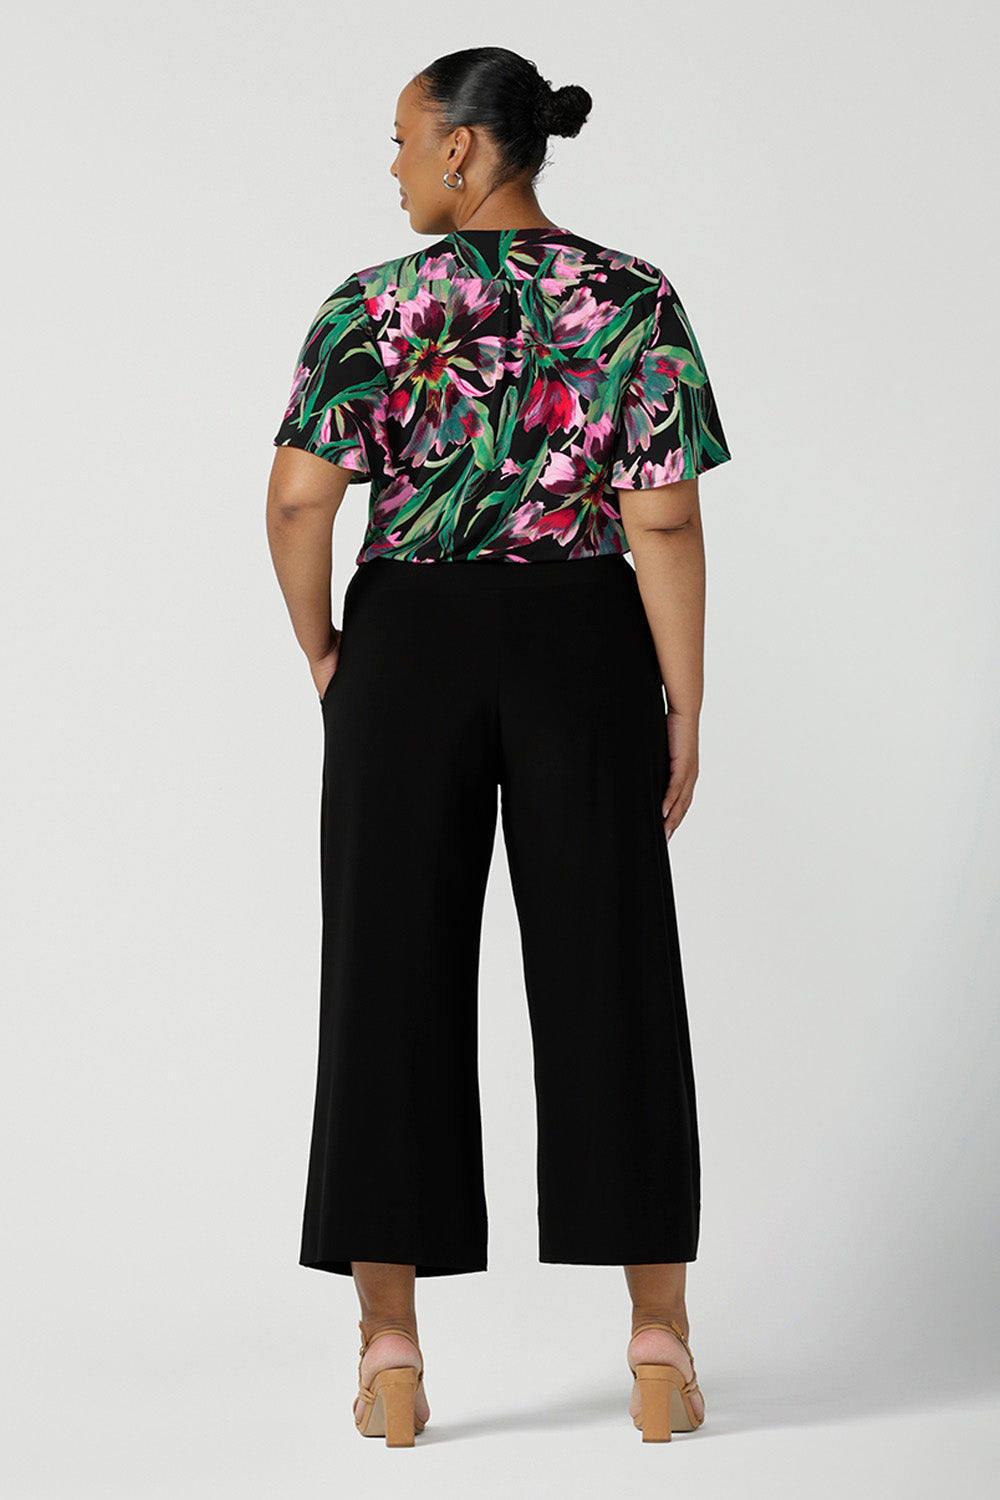 Back view of a plus size, size 18 woman wearing a floral print jersey, V-neck top with flutter sleeves with wide leg black pants. A good top for summer casual wear, or style tucked as a workwear top. Shop made in Australia tops in petite to plus sizes online at Australian fashion brand, Leina & Fleur.